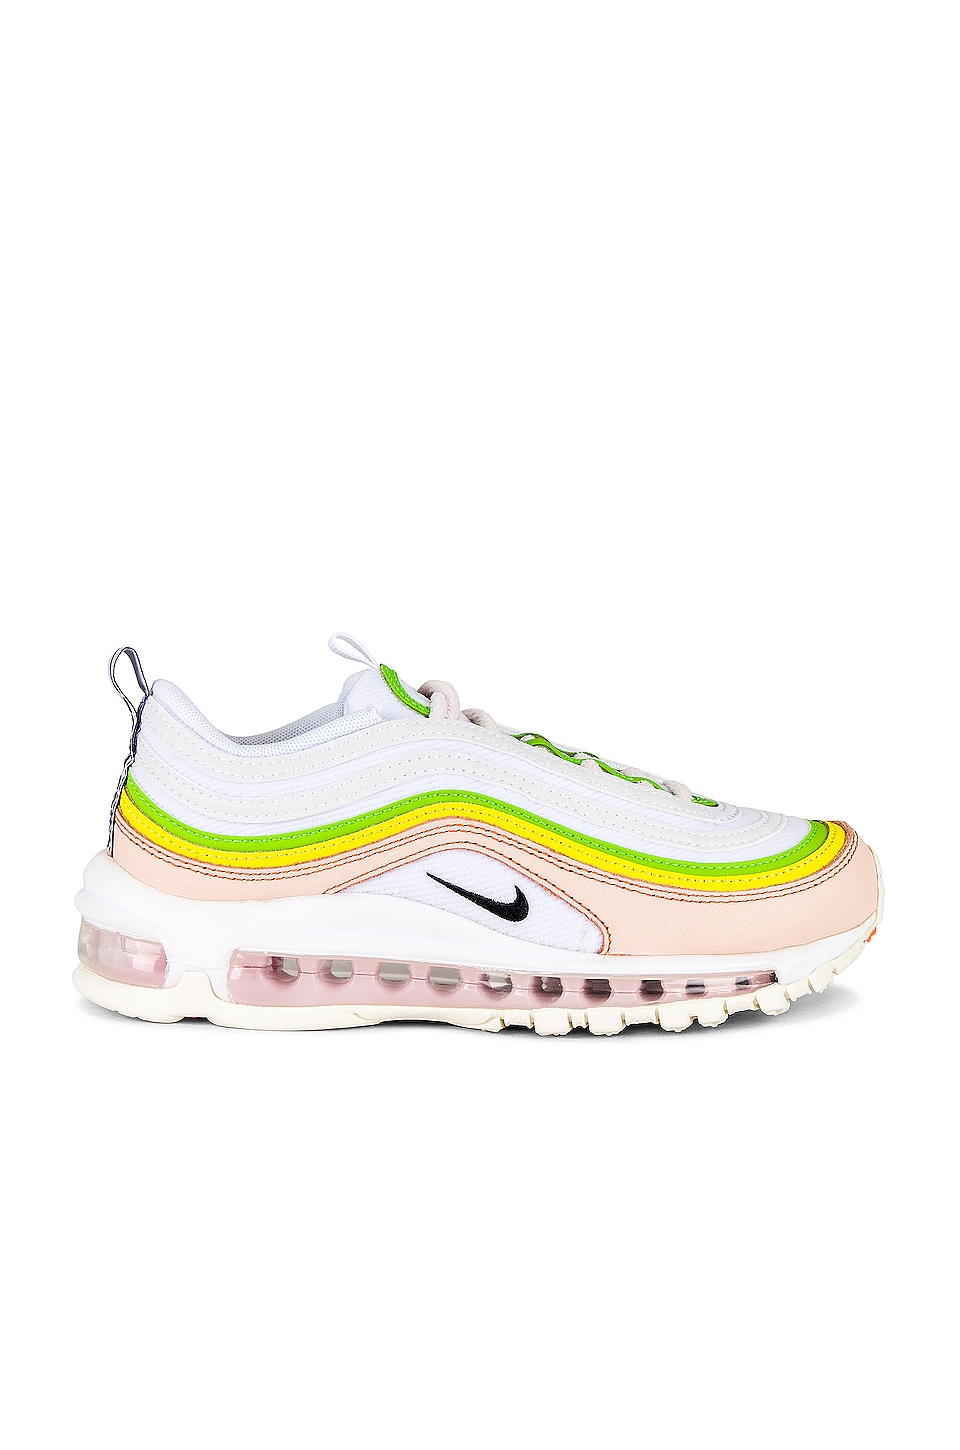 test Vijf Slechthorend Nike Air Max 97 Sneaker in White, Black, Pearl Pink, & Action Green |  REVOLVE